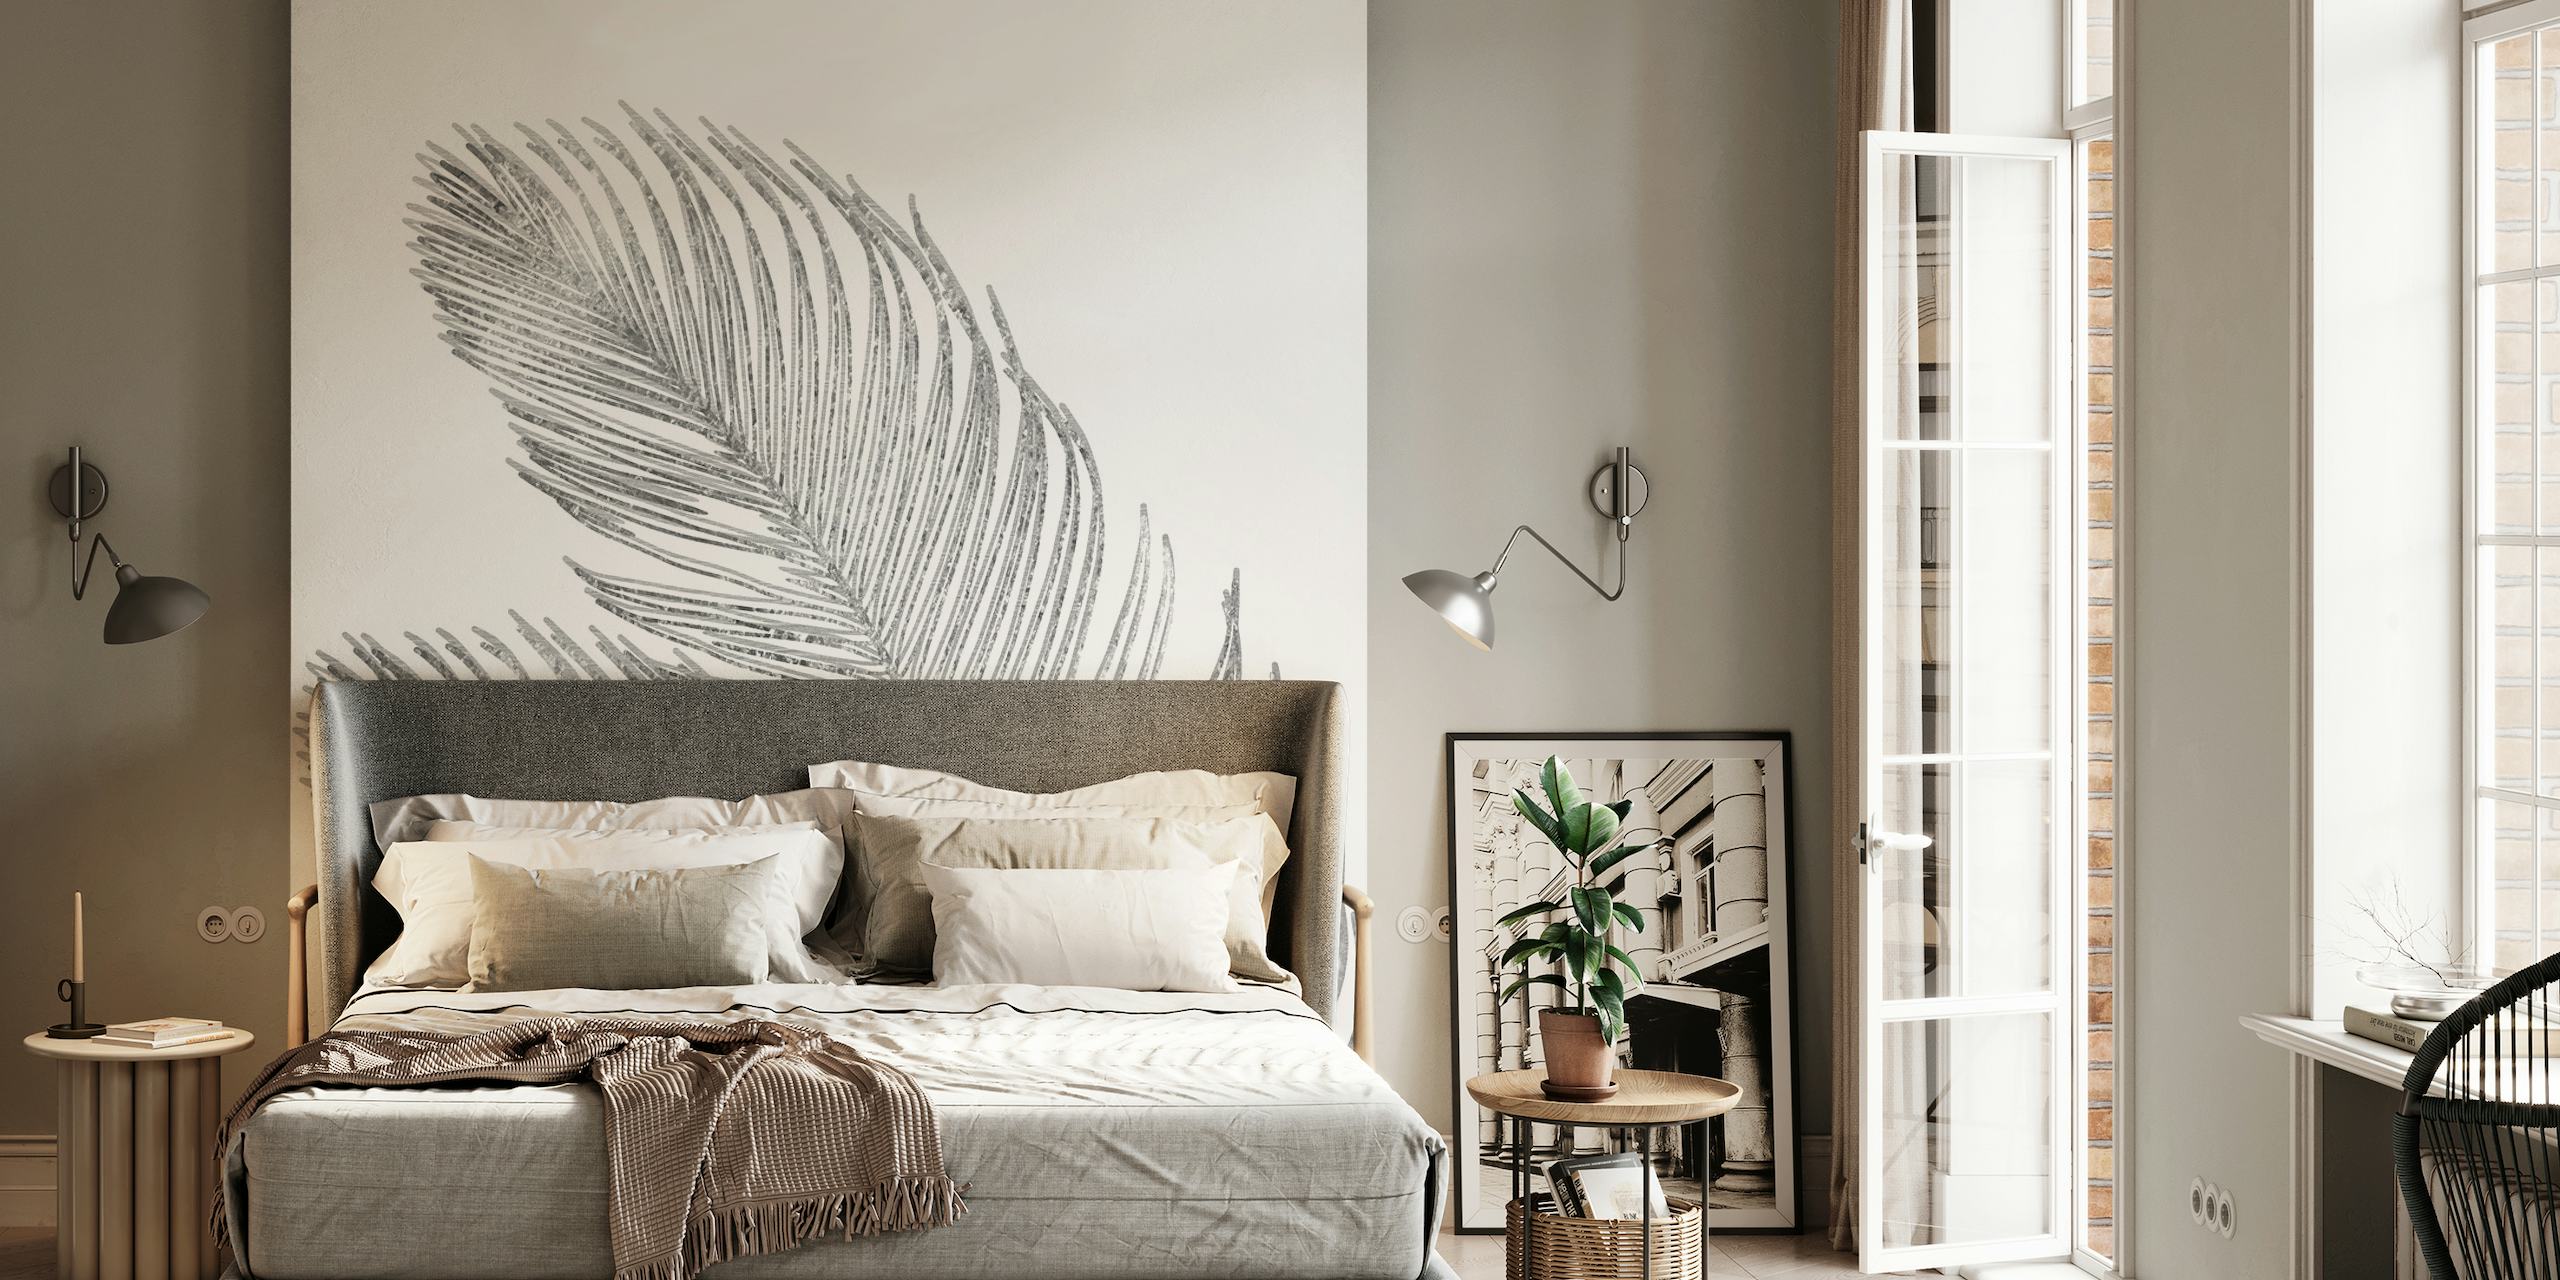 Monochrome line art of palm leaves for wall mural